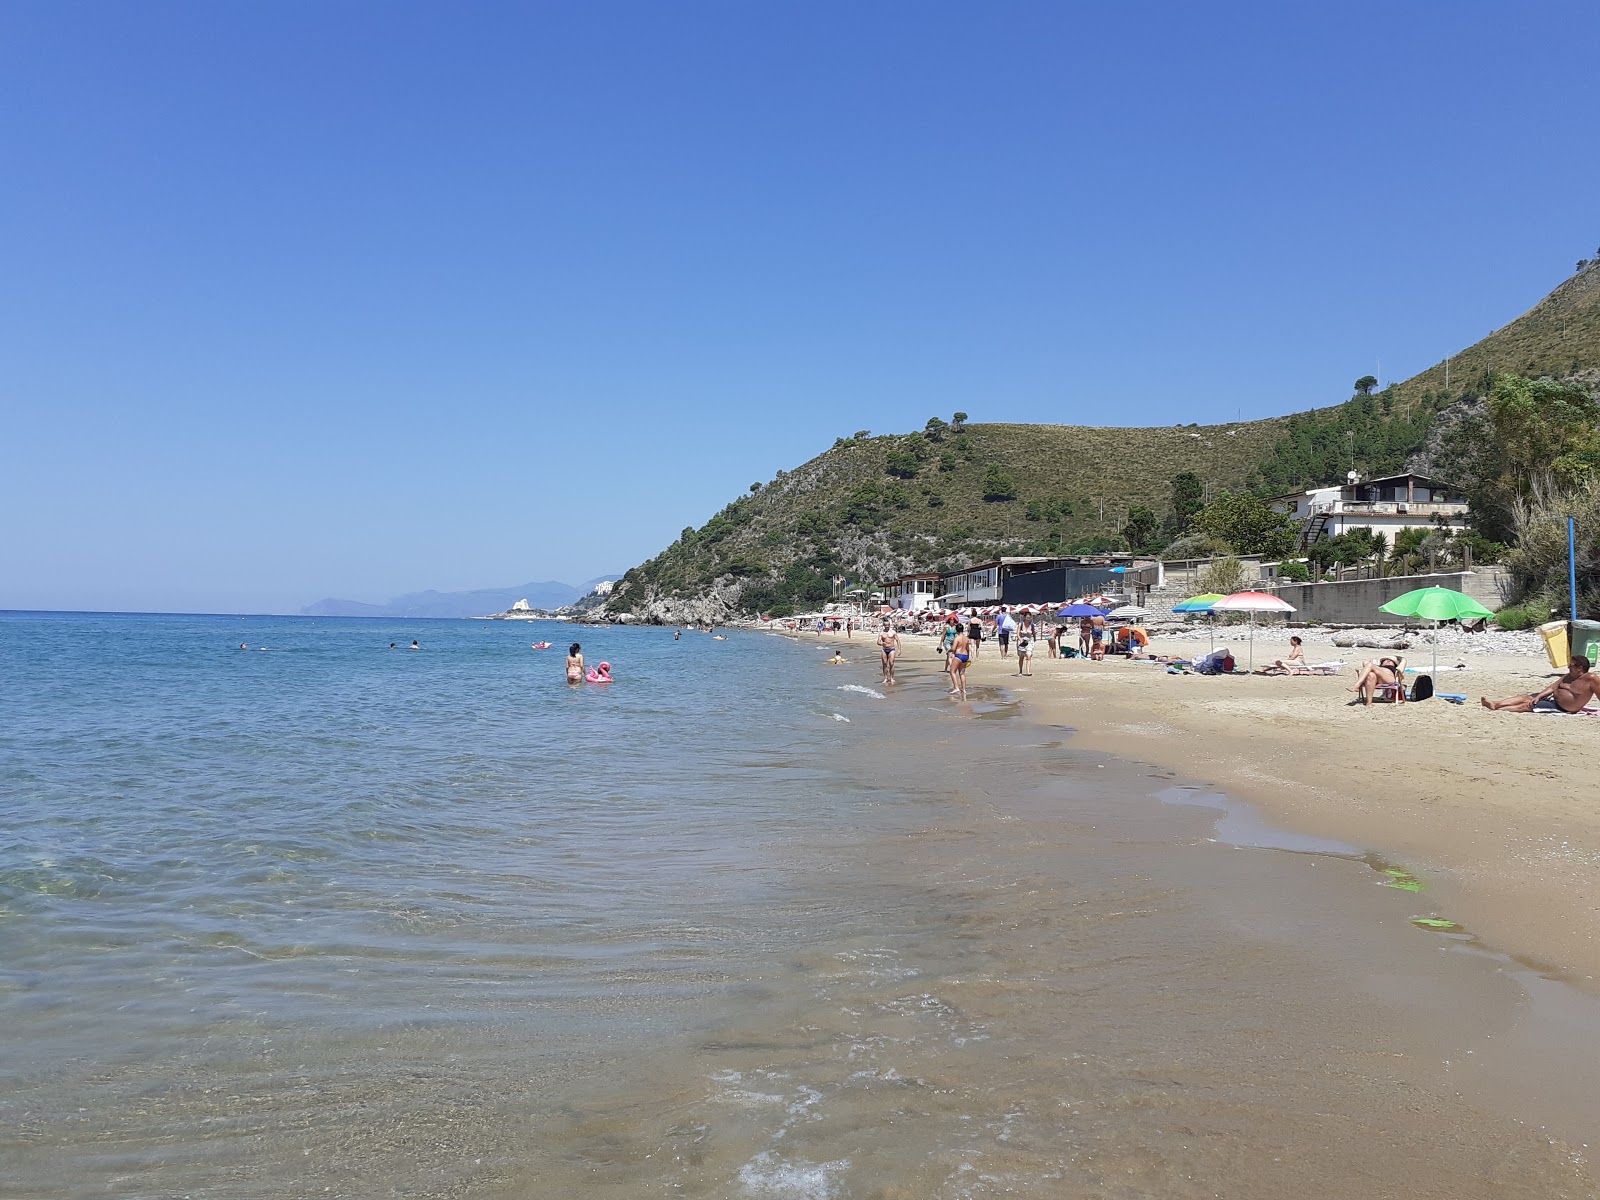 Photo of Bazzano beach with blue water surface